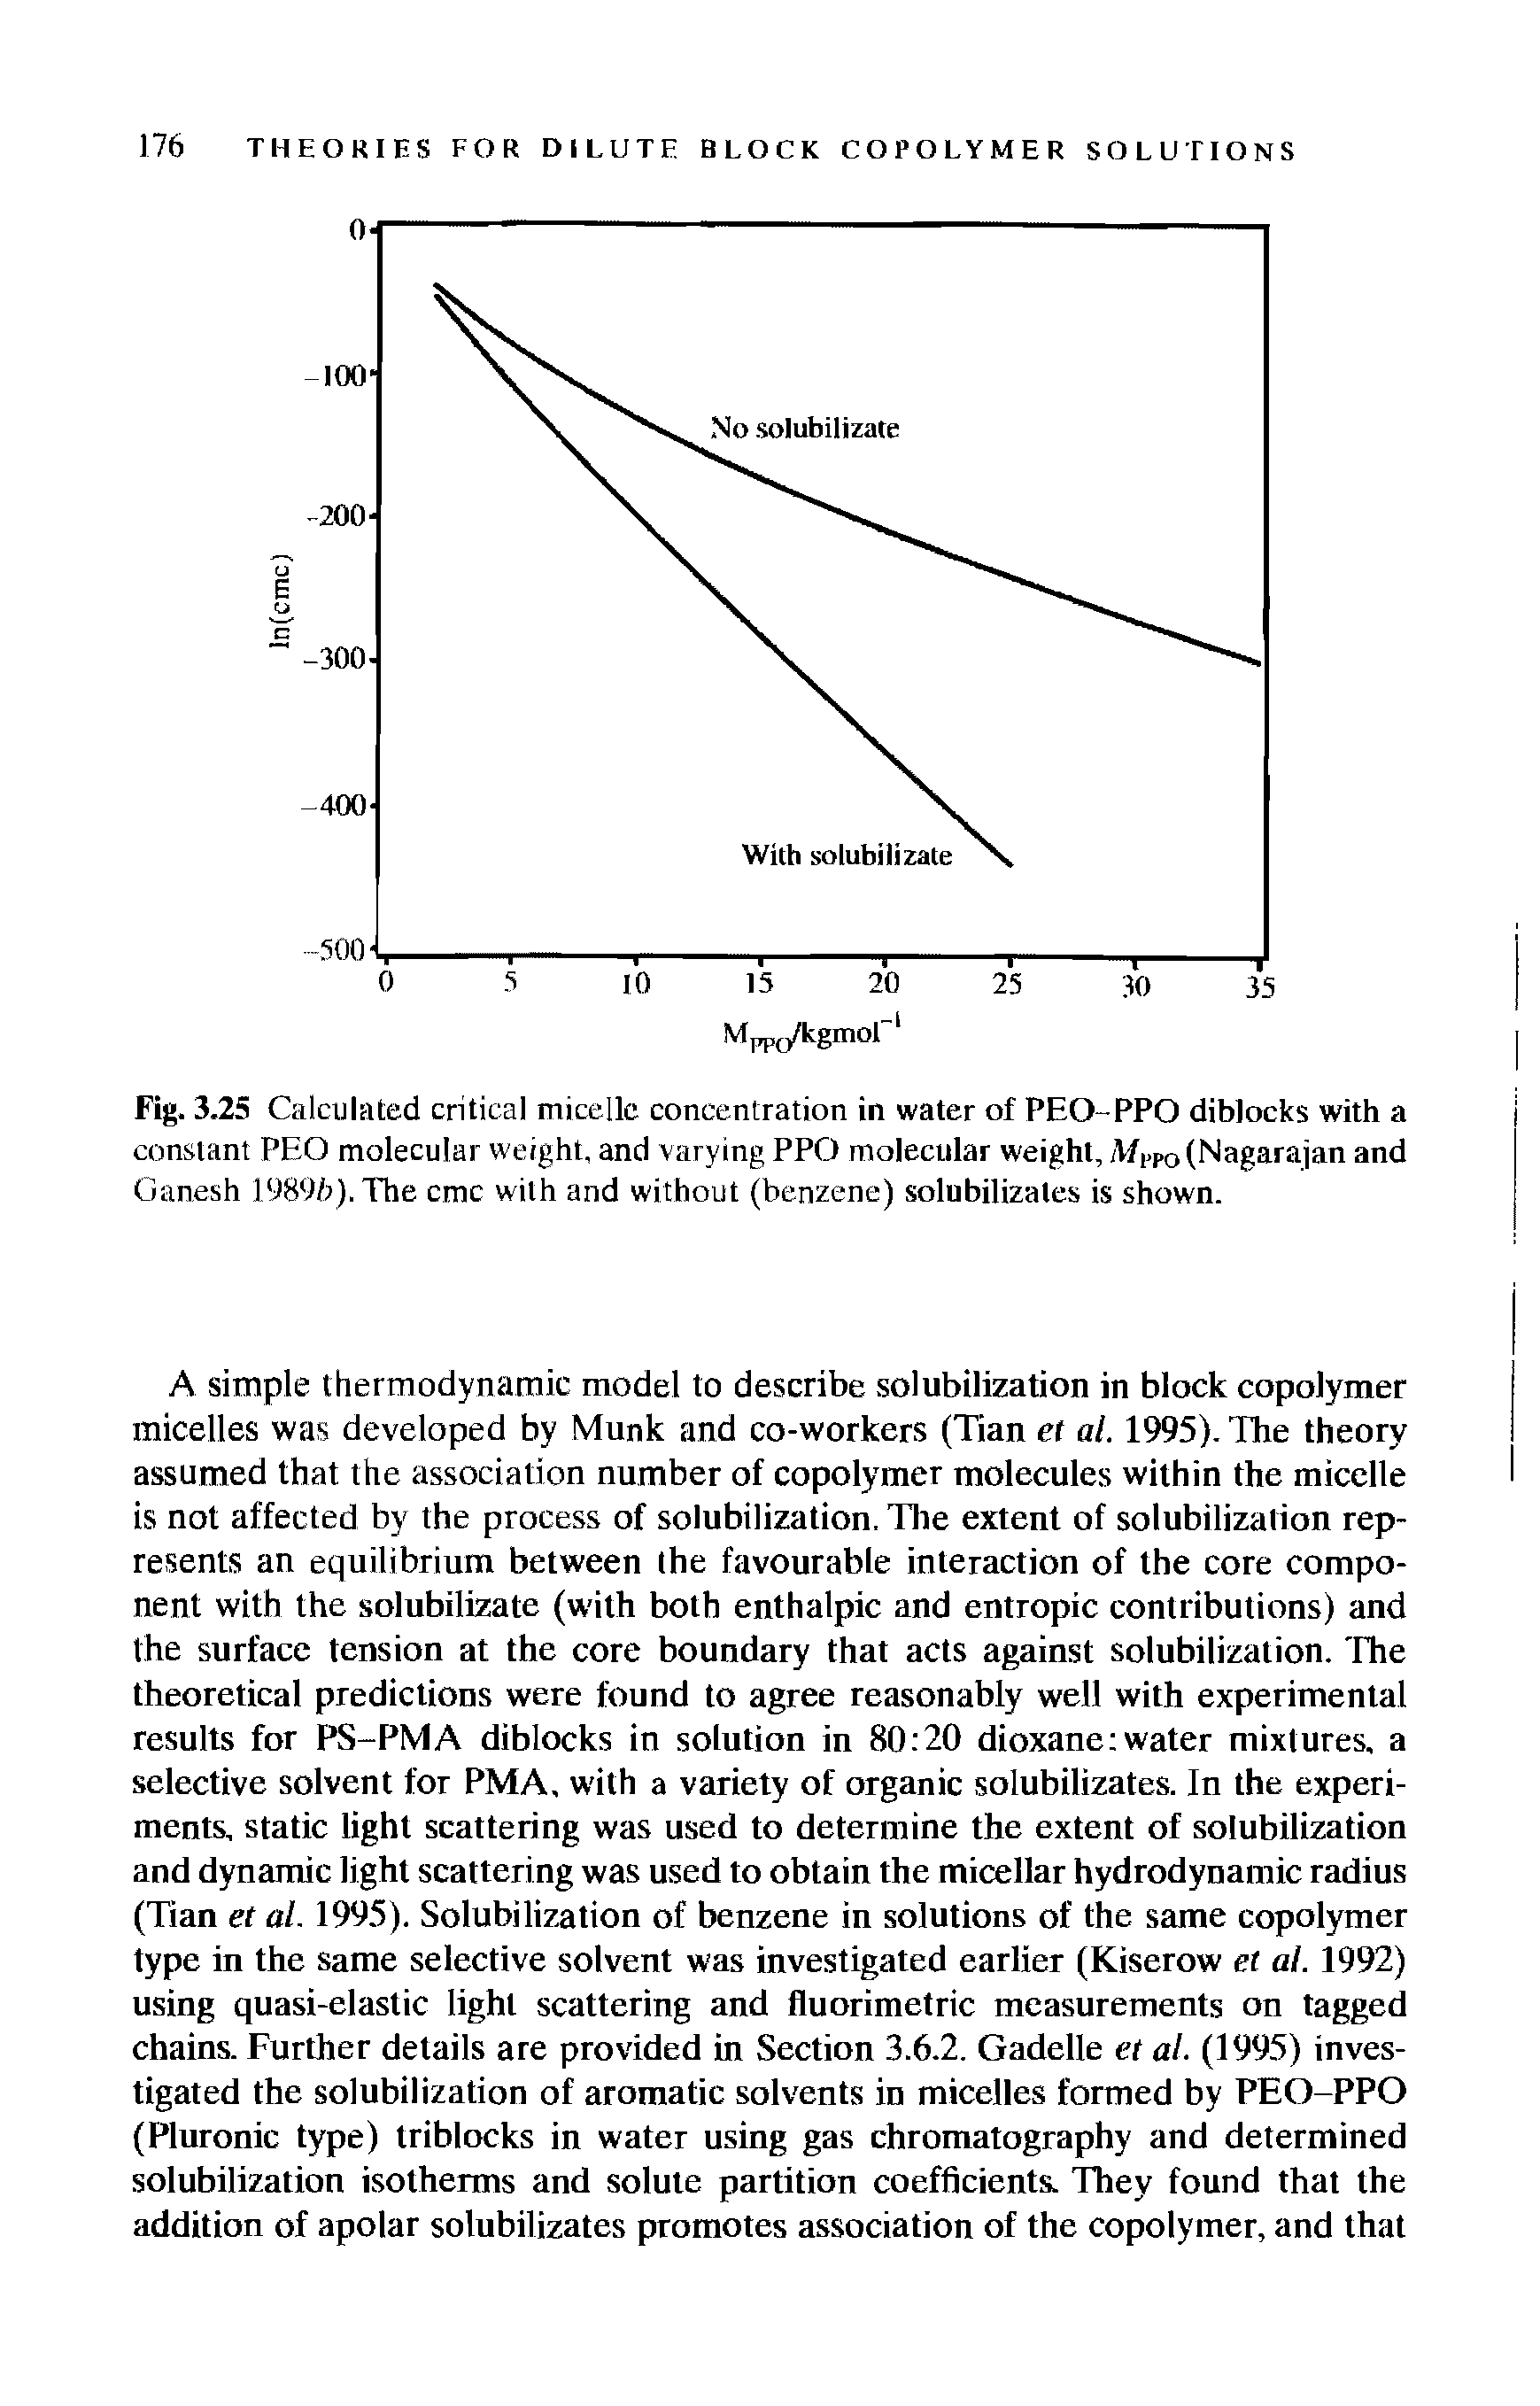 Fig. 3.25 Calculated critical micelle concentration in water of PEO-PPO diblocks with a constant PEO molecular weight, and varying PPO molecular weight, A/1TO(Nagarajan and Ganesh 1989ft). The one with and without (benzene) solubilizales is shown.